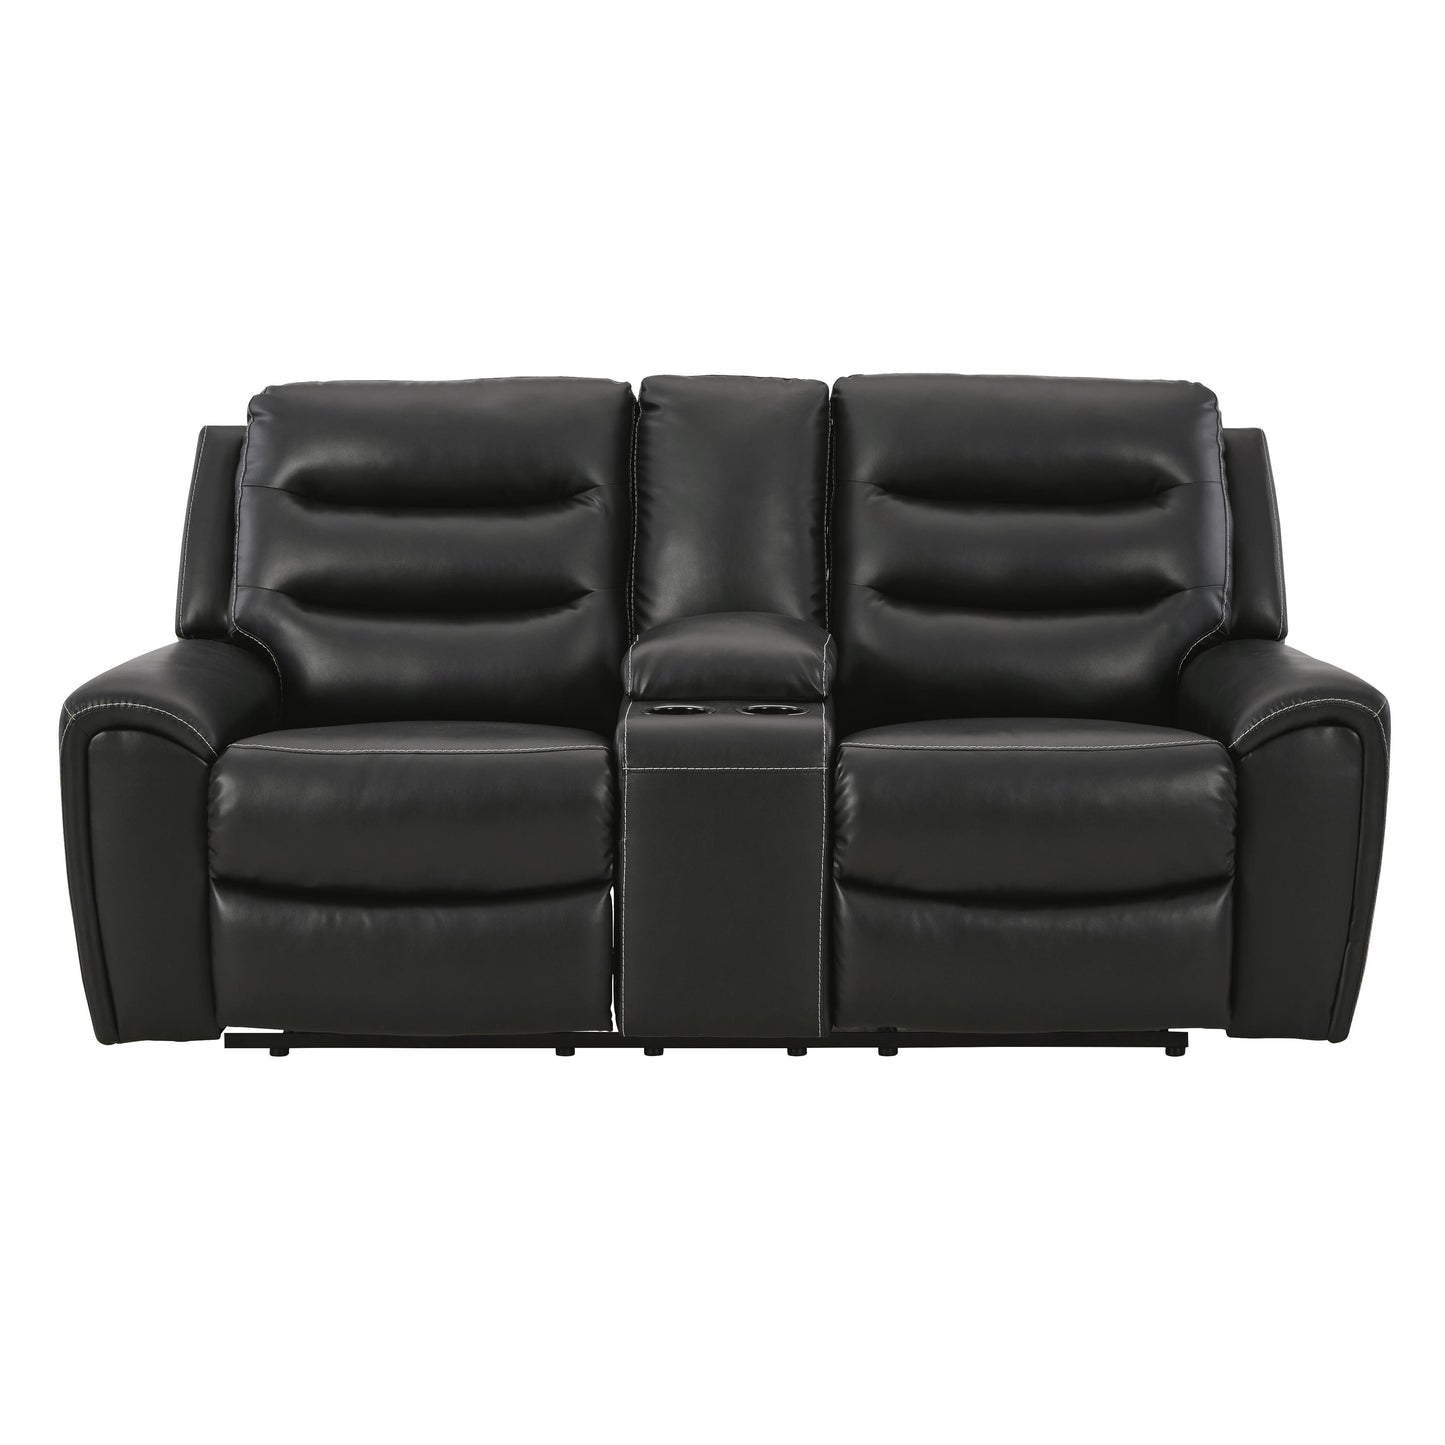 Signature Design by Ashley Warlin Power Reclining Leather Look Loveseat 6110518 IMAGE 3